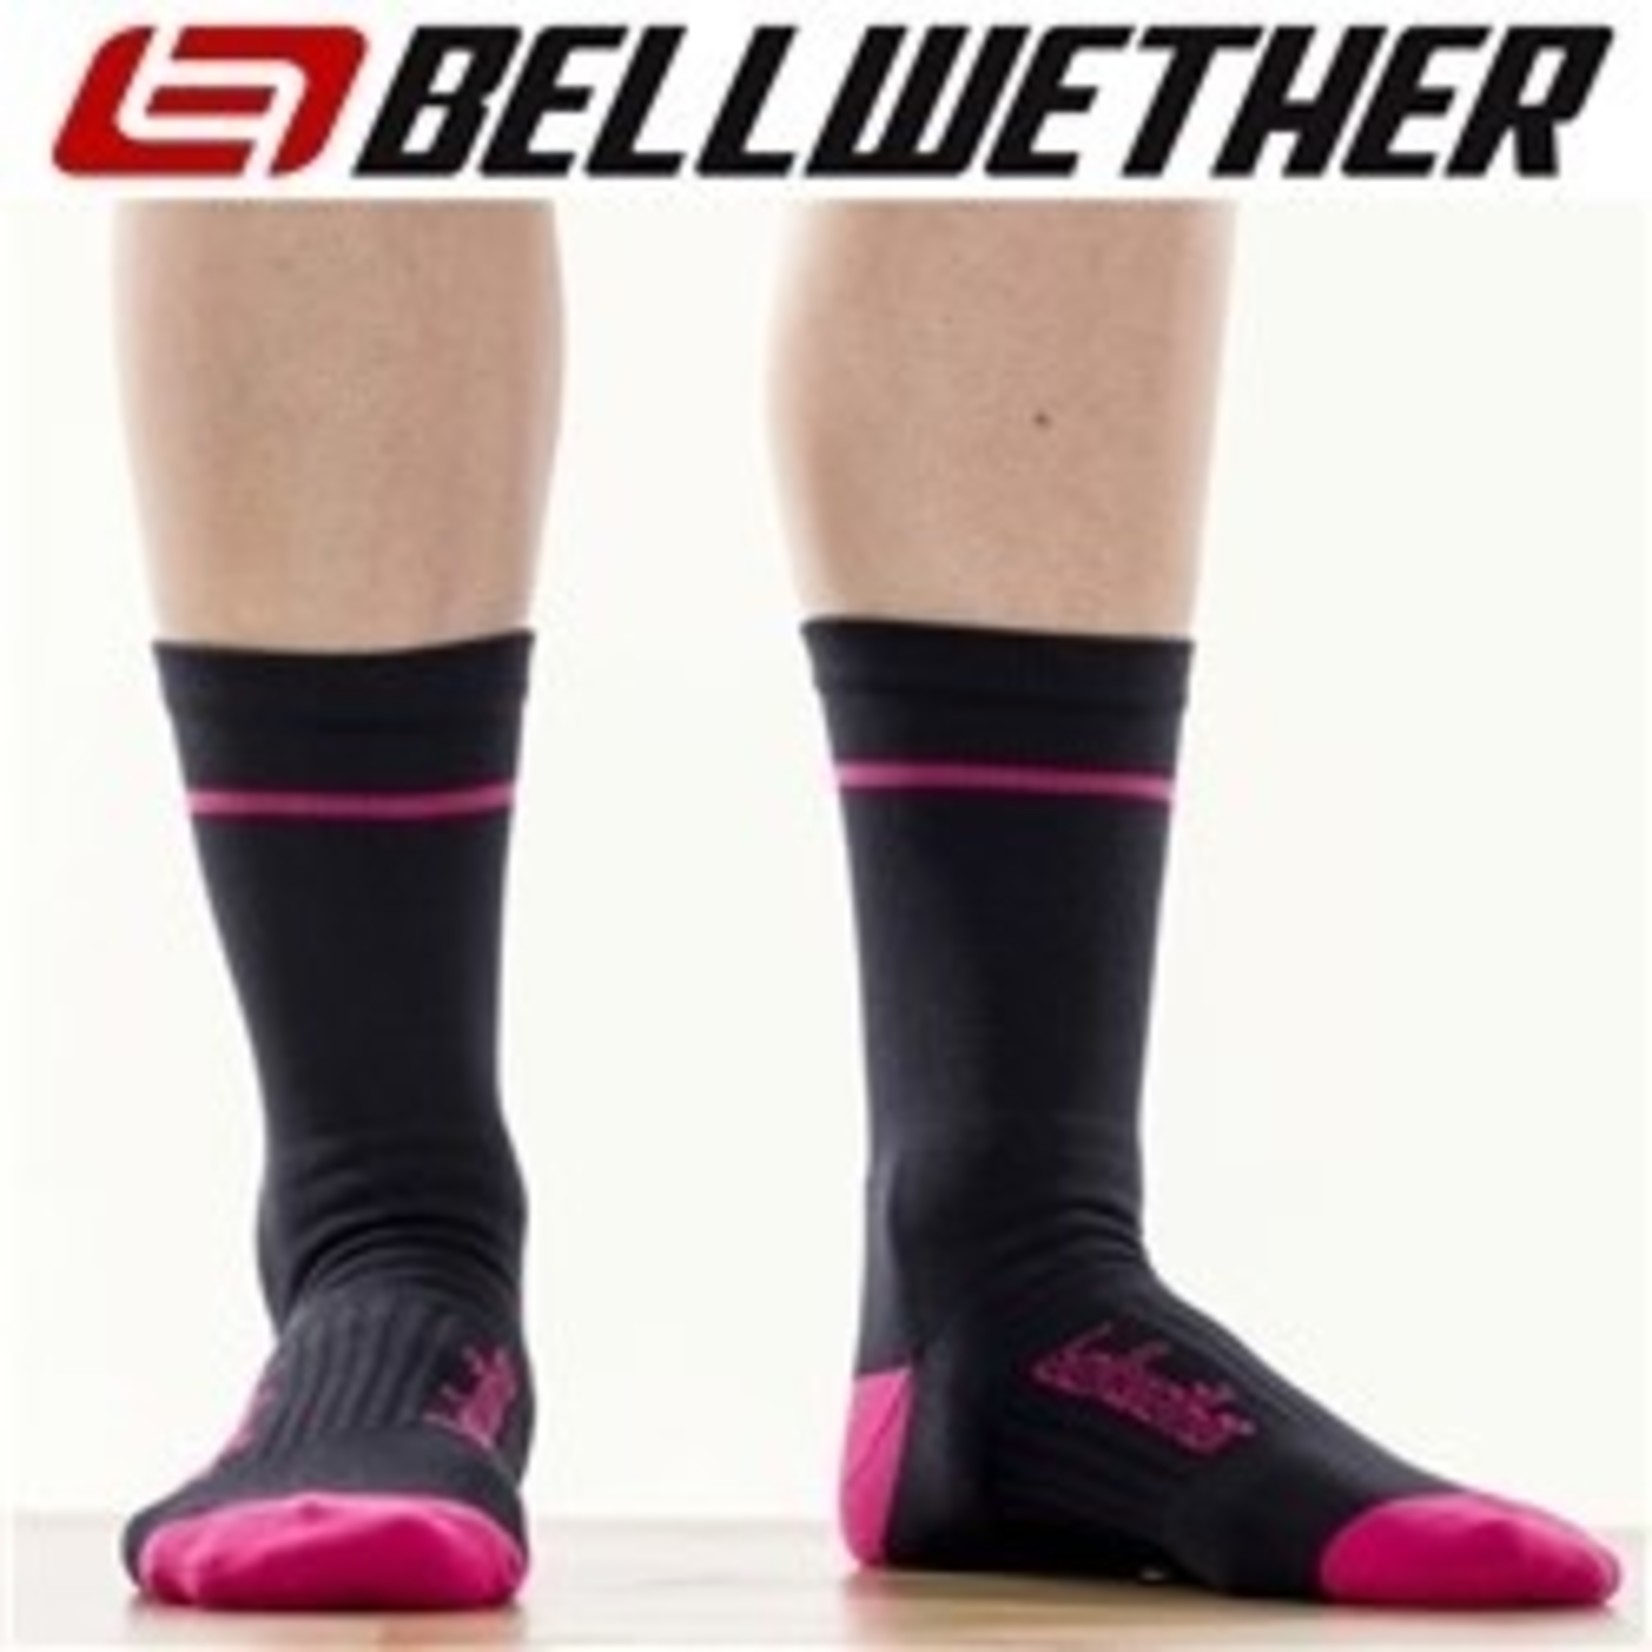 Bellwether Bellwether Cycling Sock - Optime Sock - Black/Berry